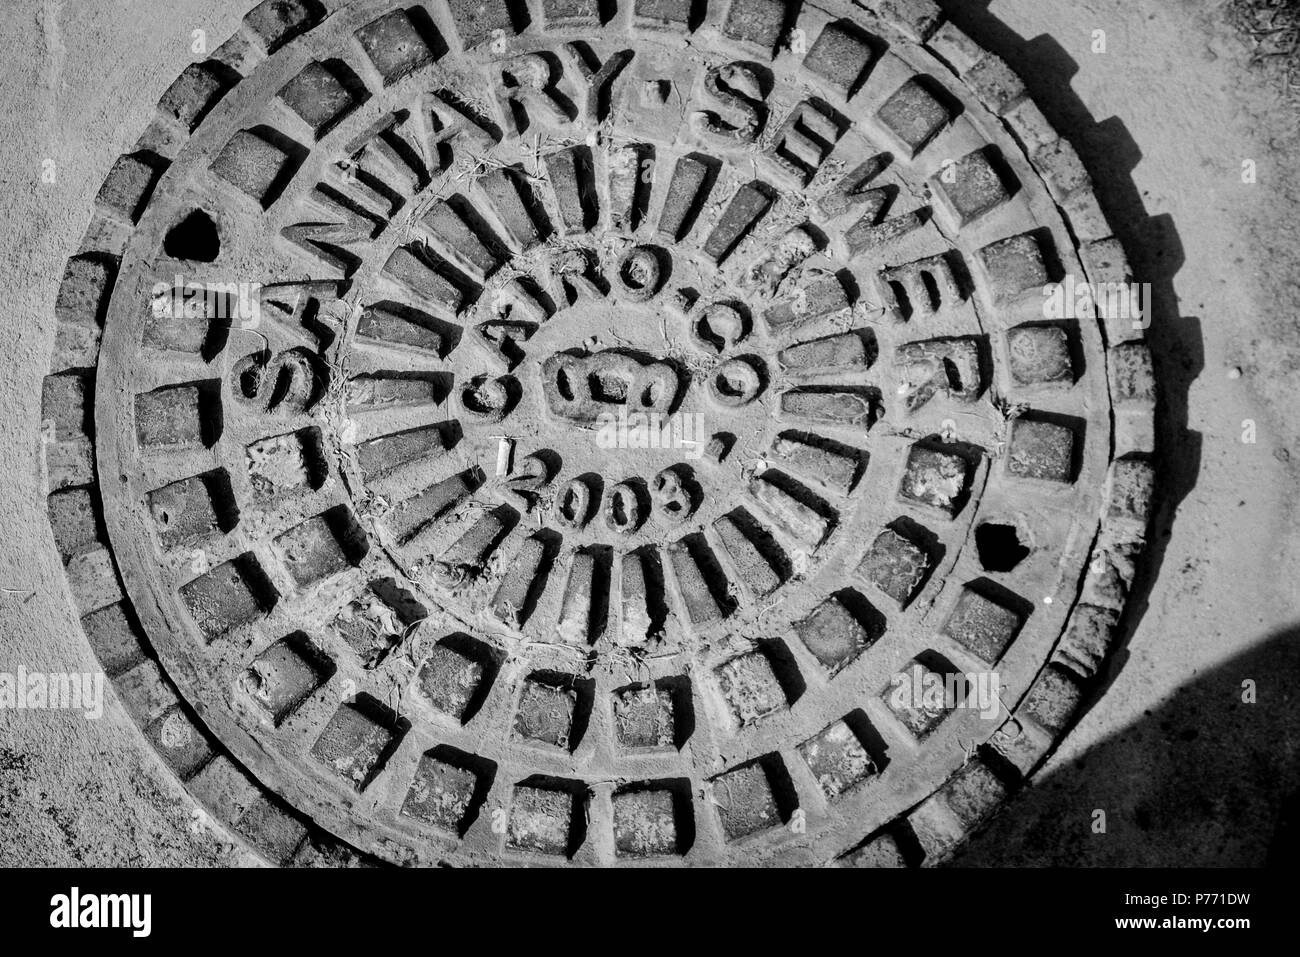 A Manhole cover found in Cairo, Egypt. Stock Photo